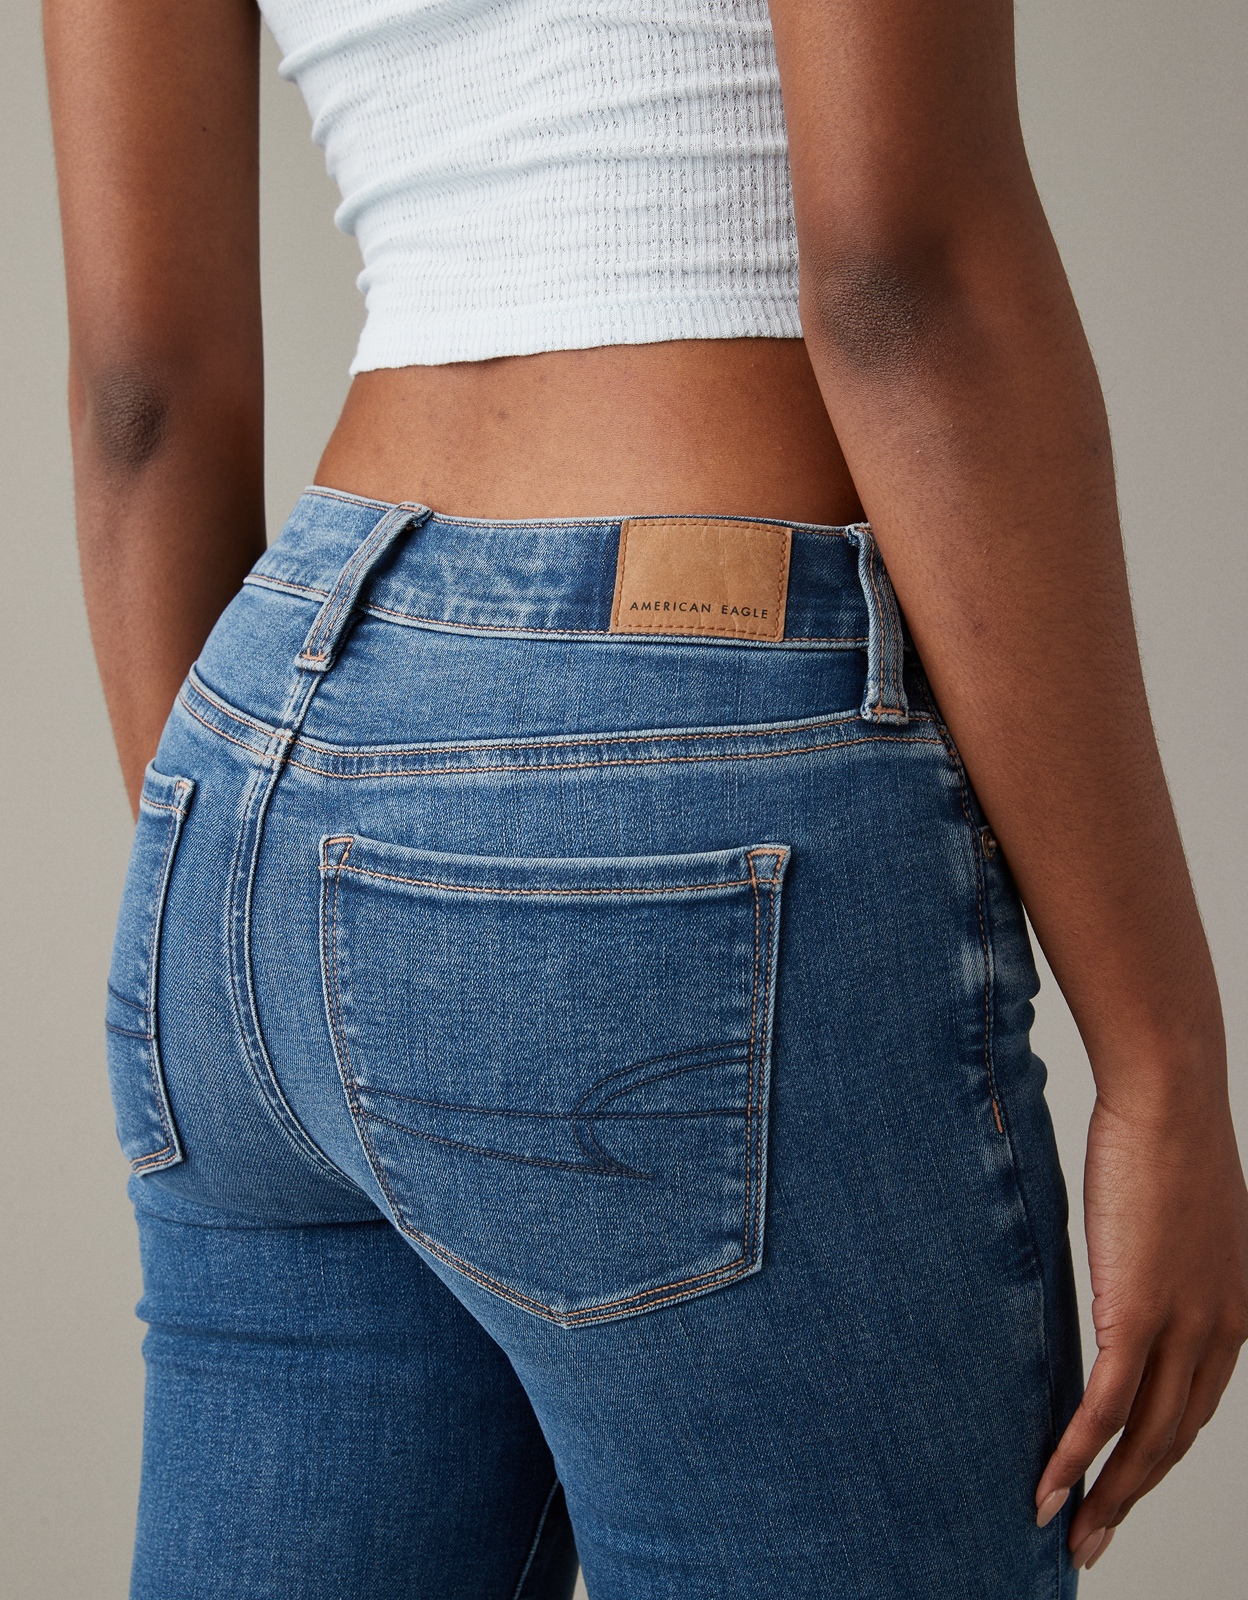 AE Next Level High-Waisted Jegging Crop